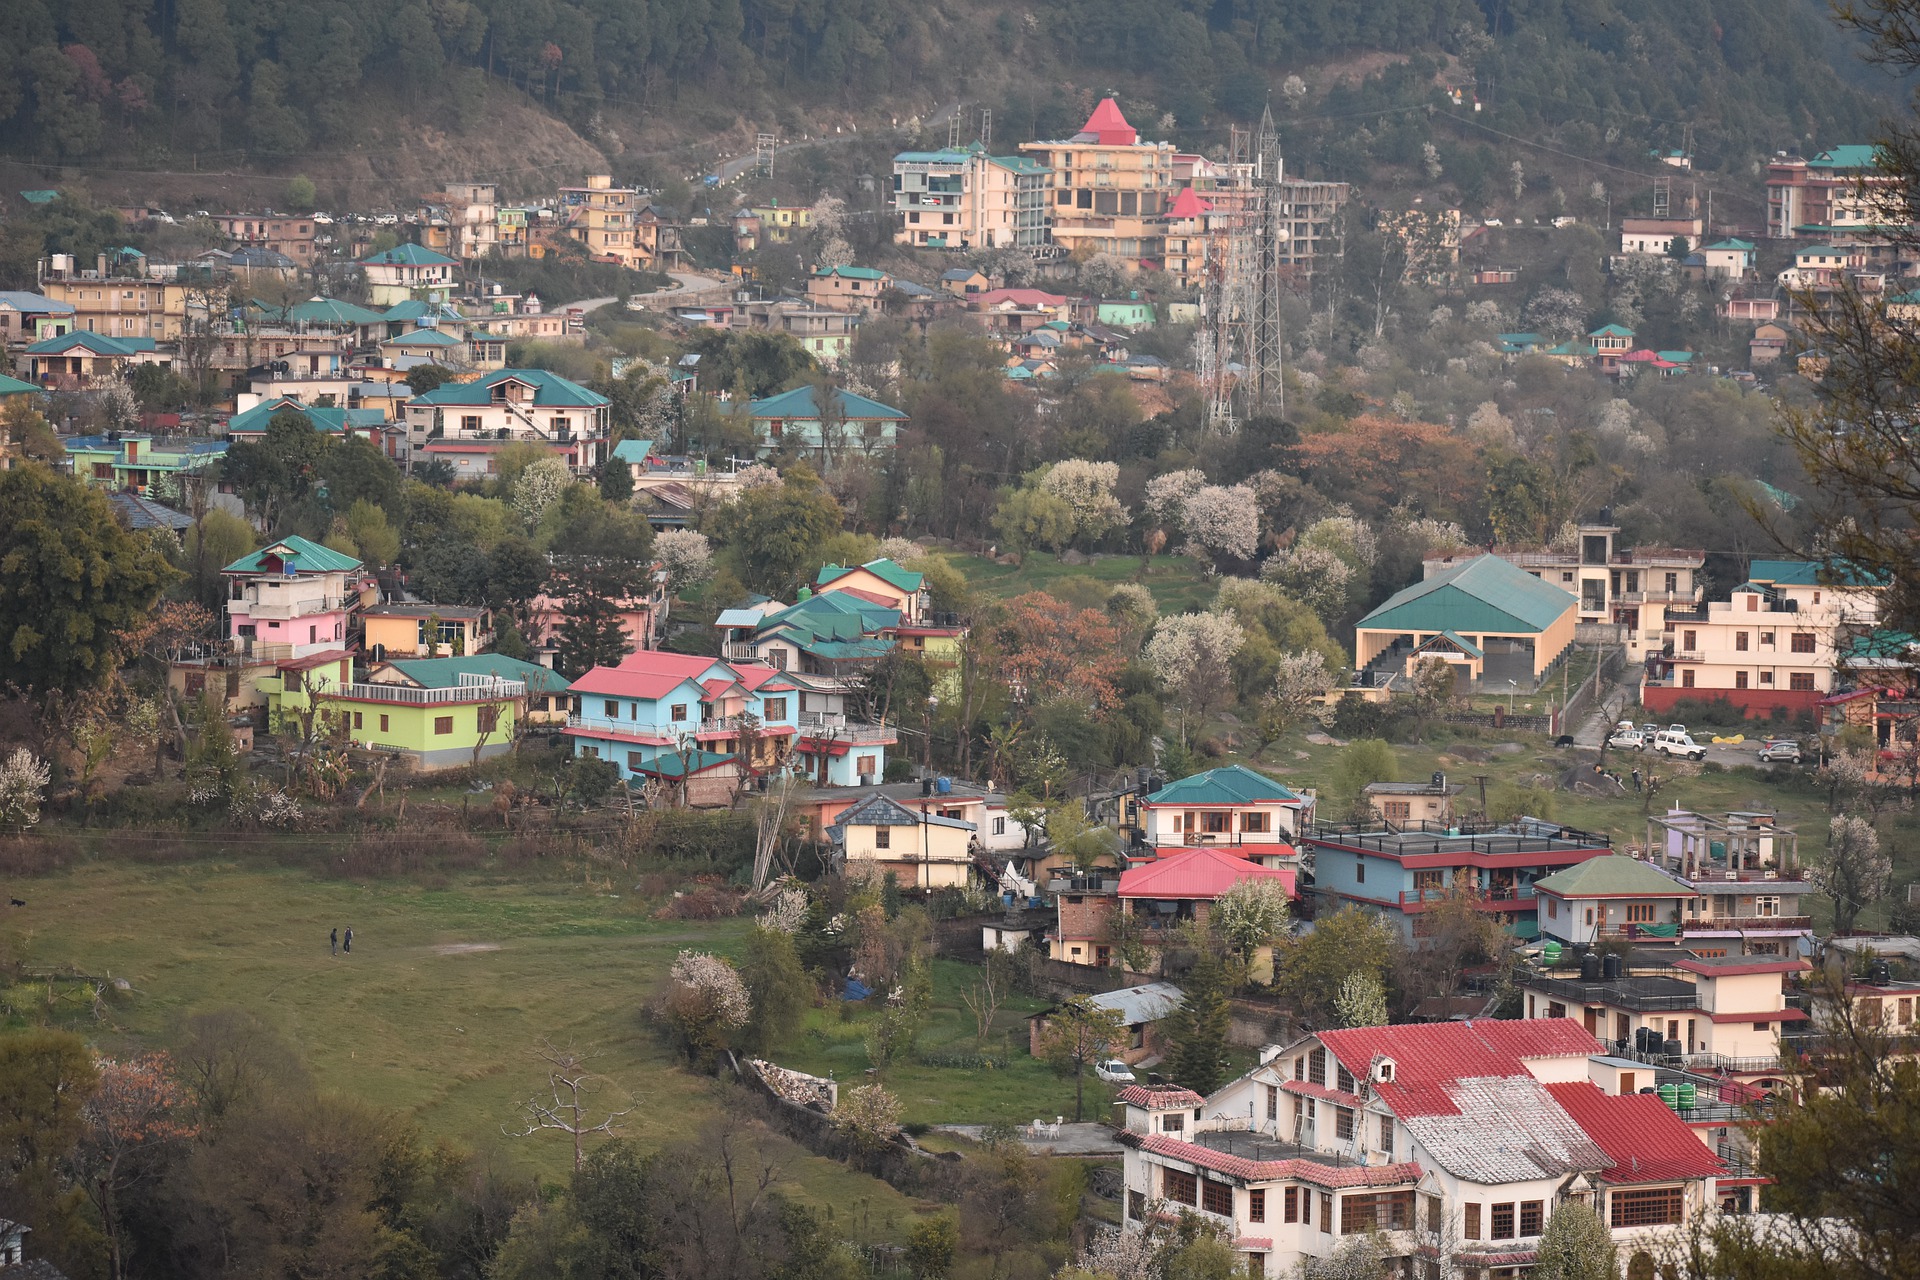 Forest pays the price for Dharamshala’s growth as tourist spot